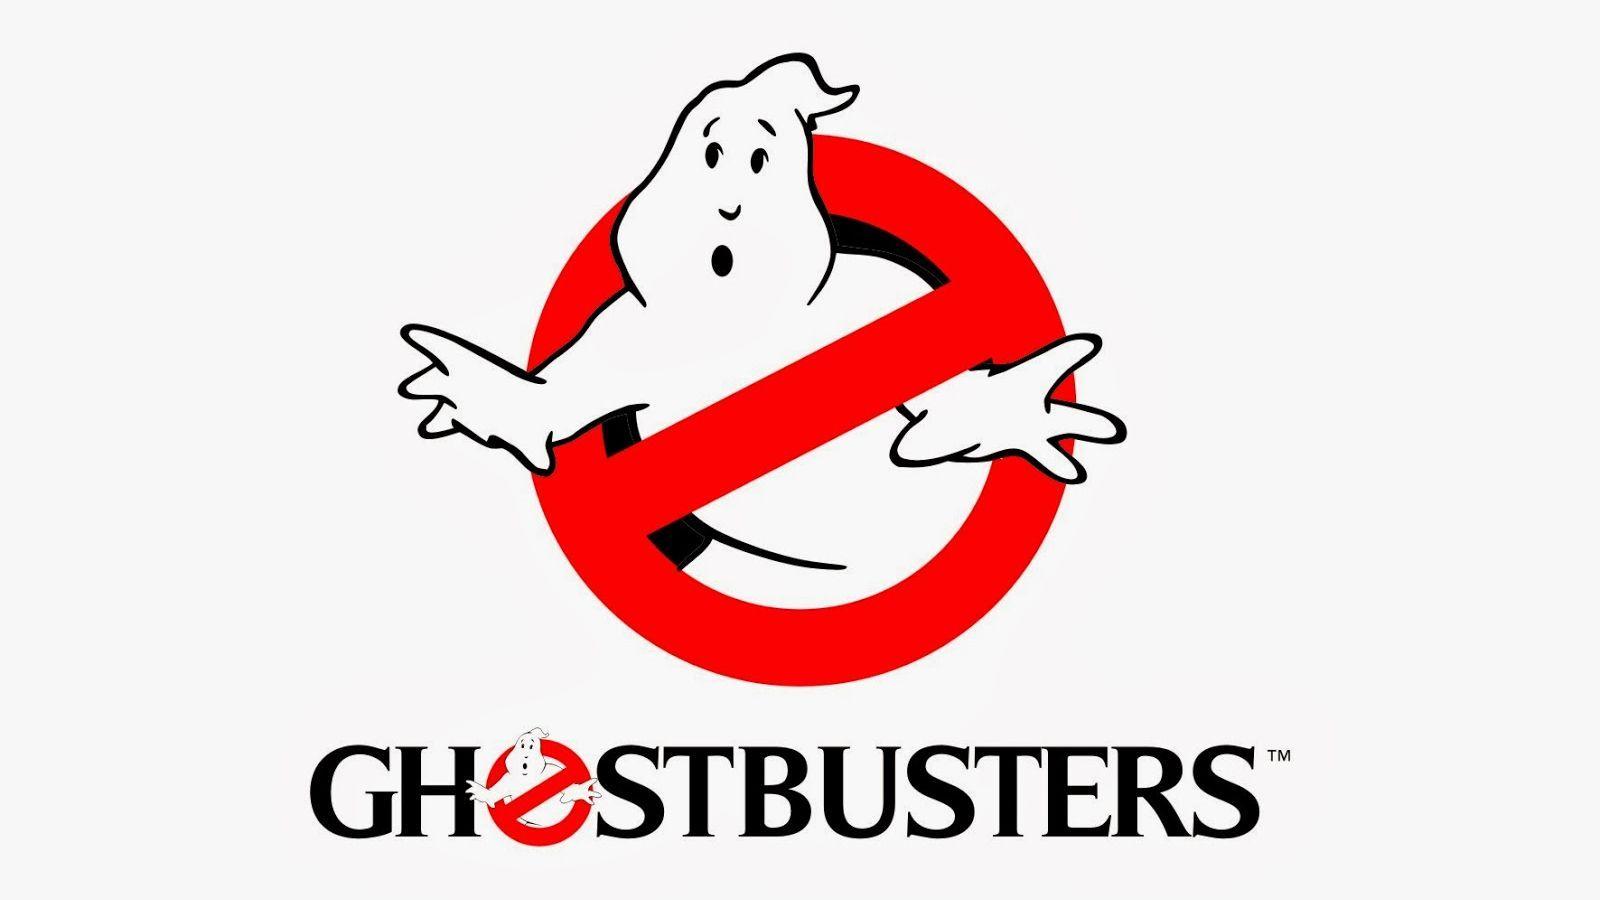 Ghostbusters wallpaper, Video Game, HQ Ghostbusters pictureK